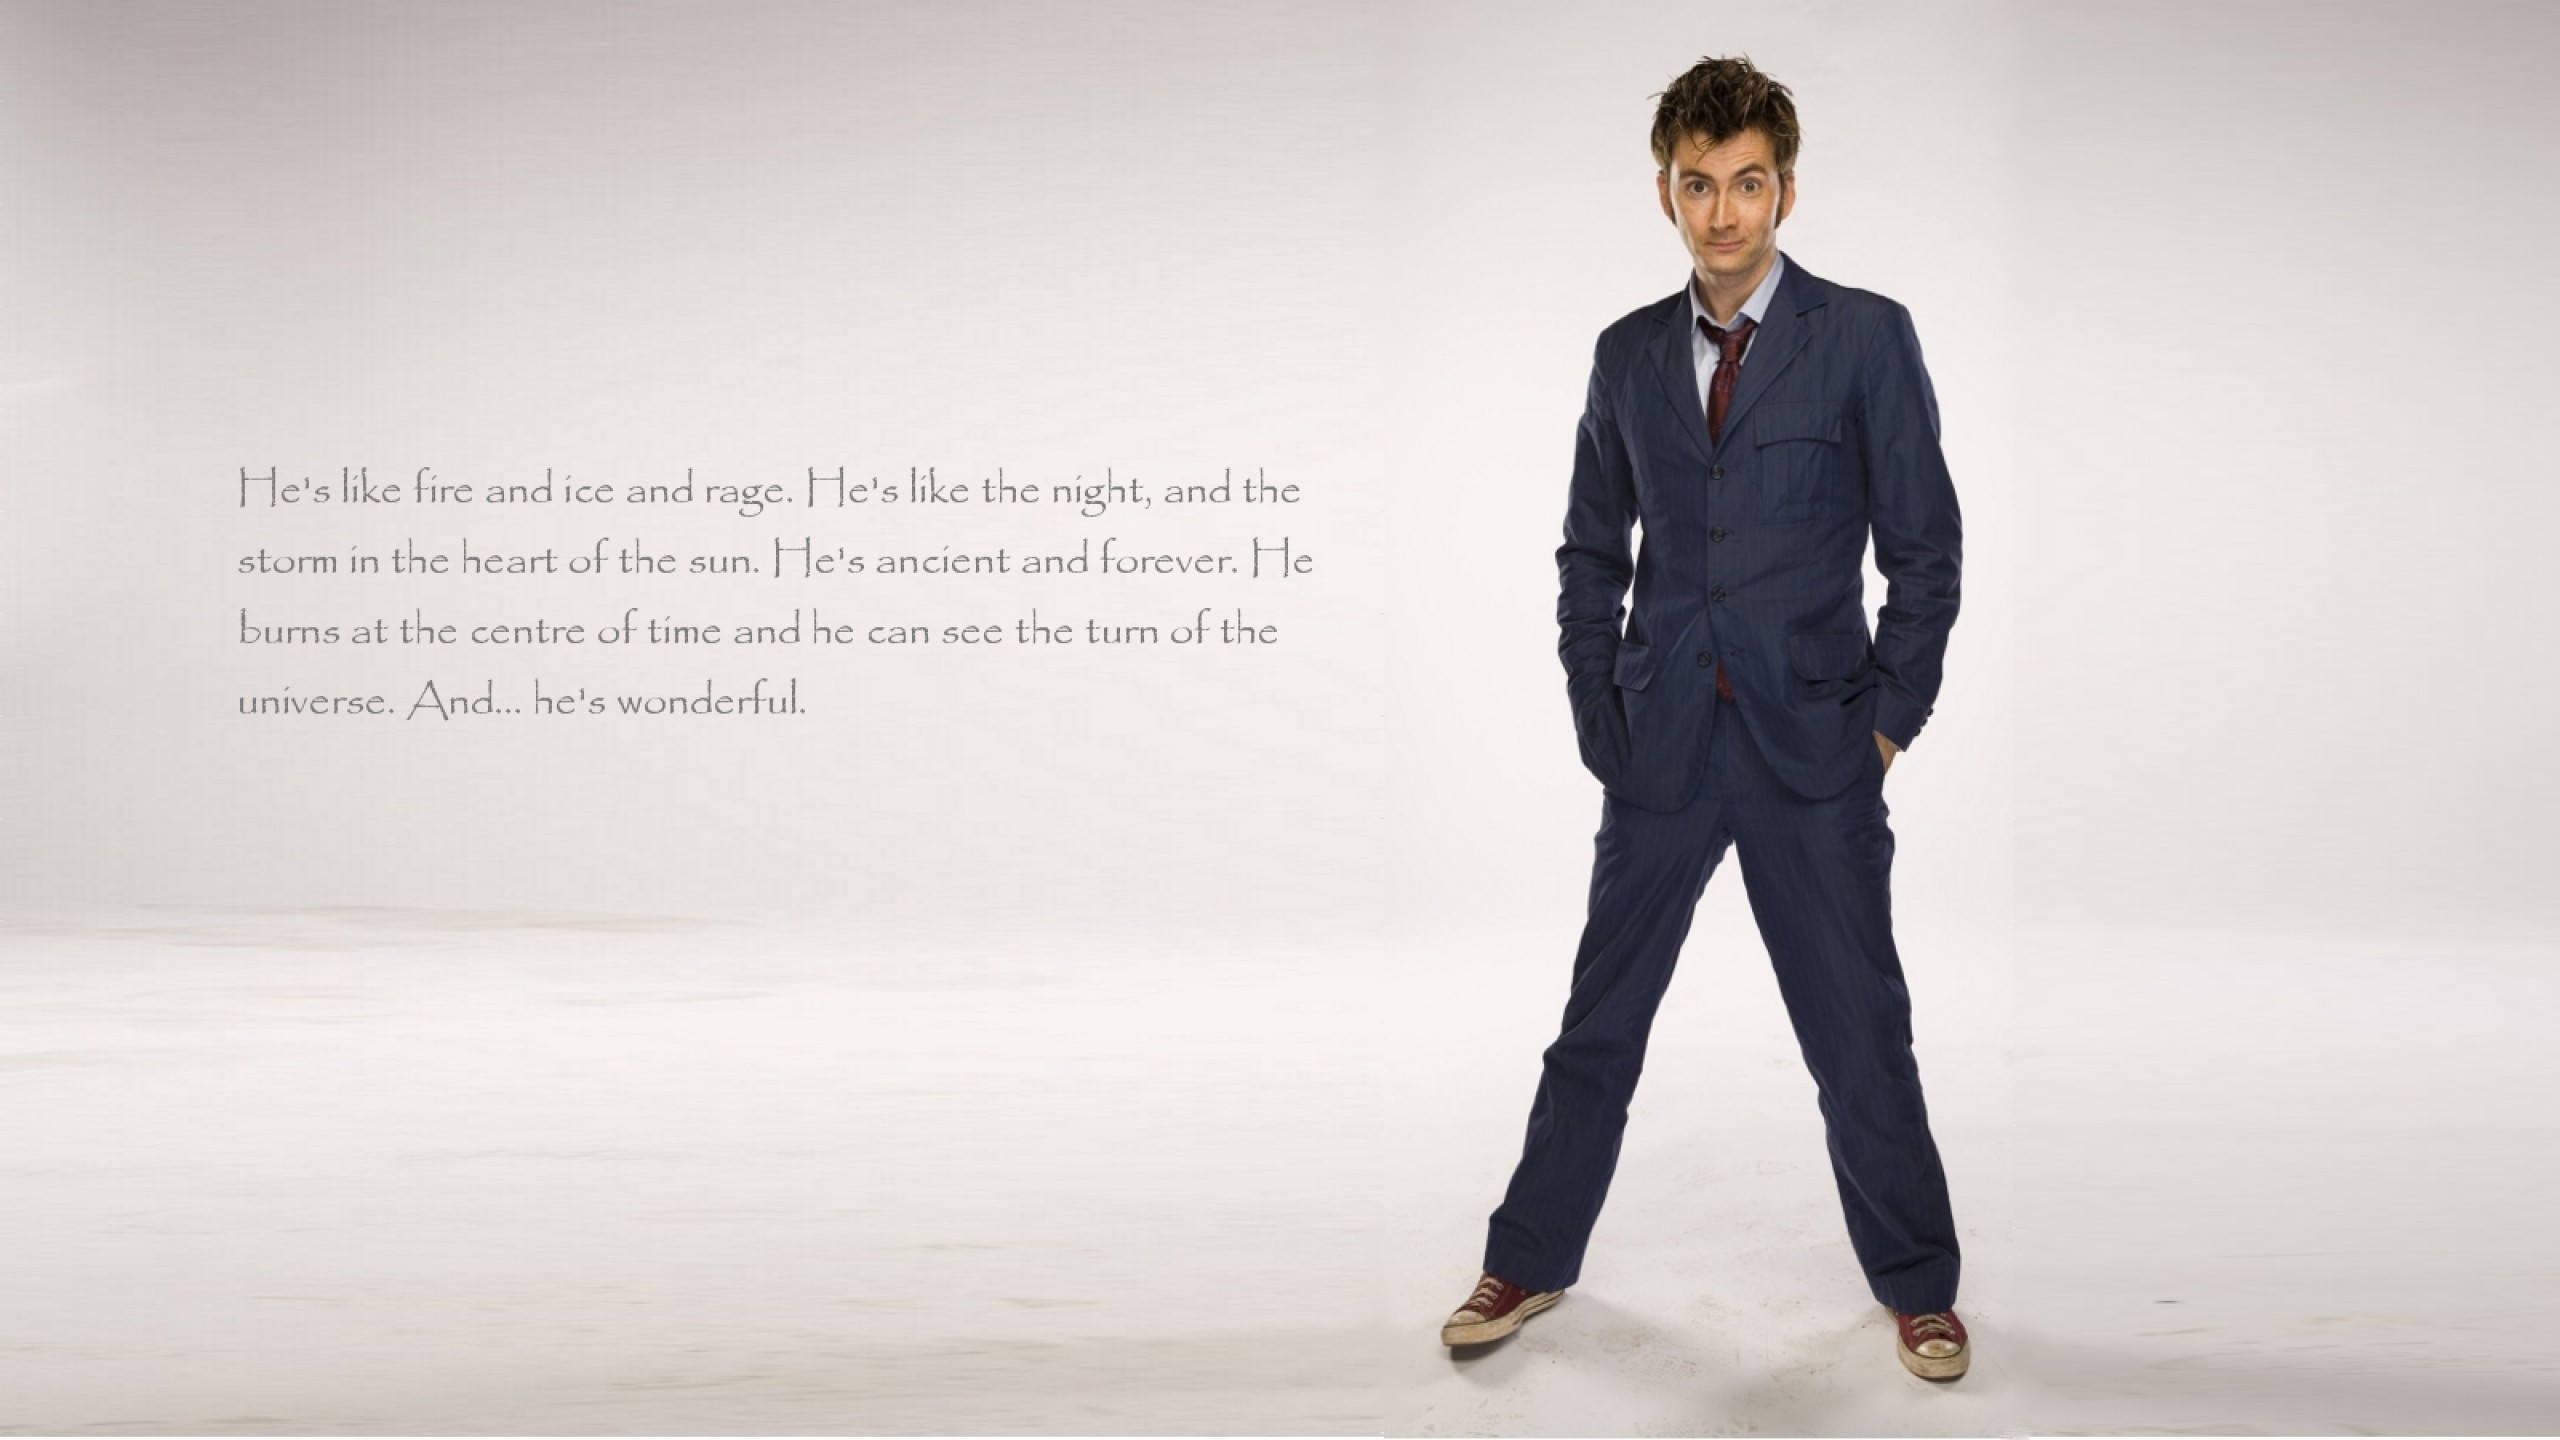 Doctor Who, The Doctor, TARDIS, David Tennant, Tenth Doctor, Quote Wallpaper